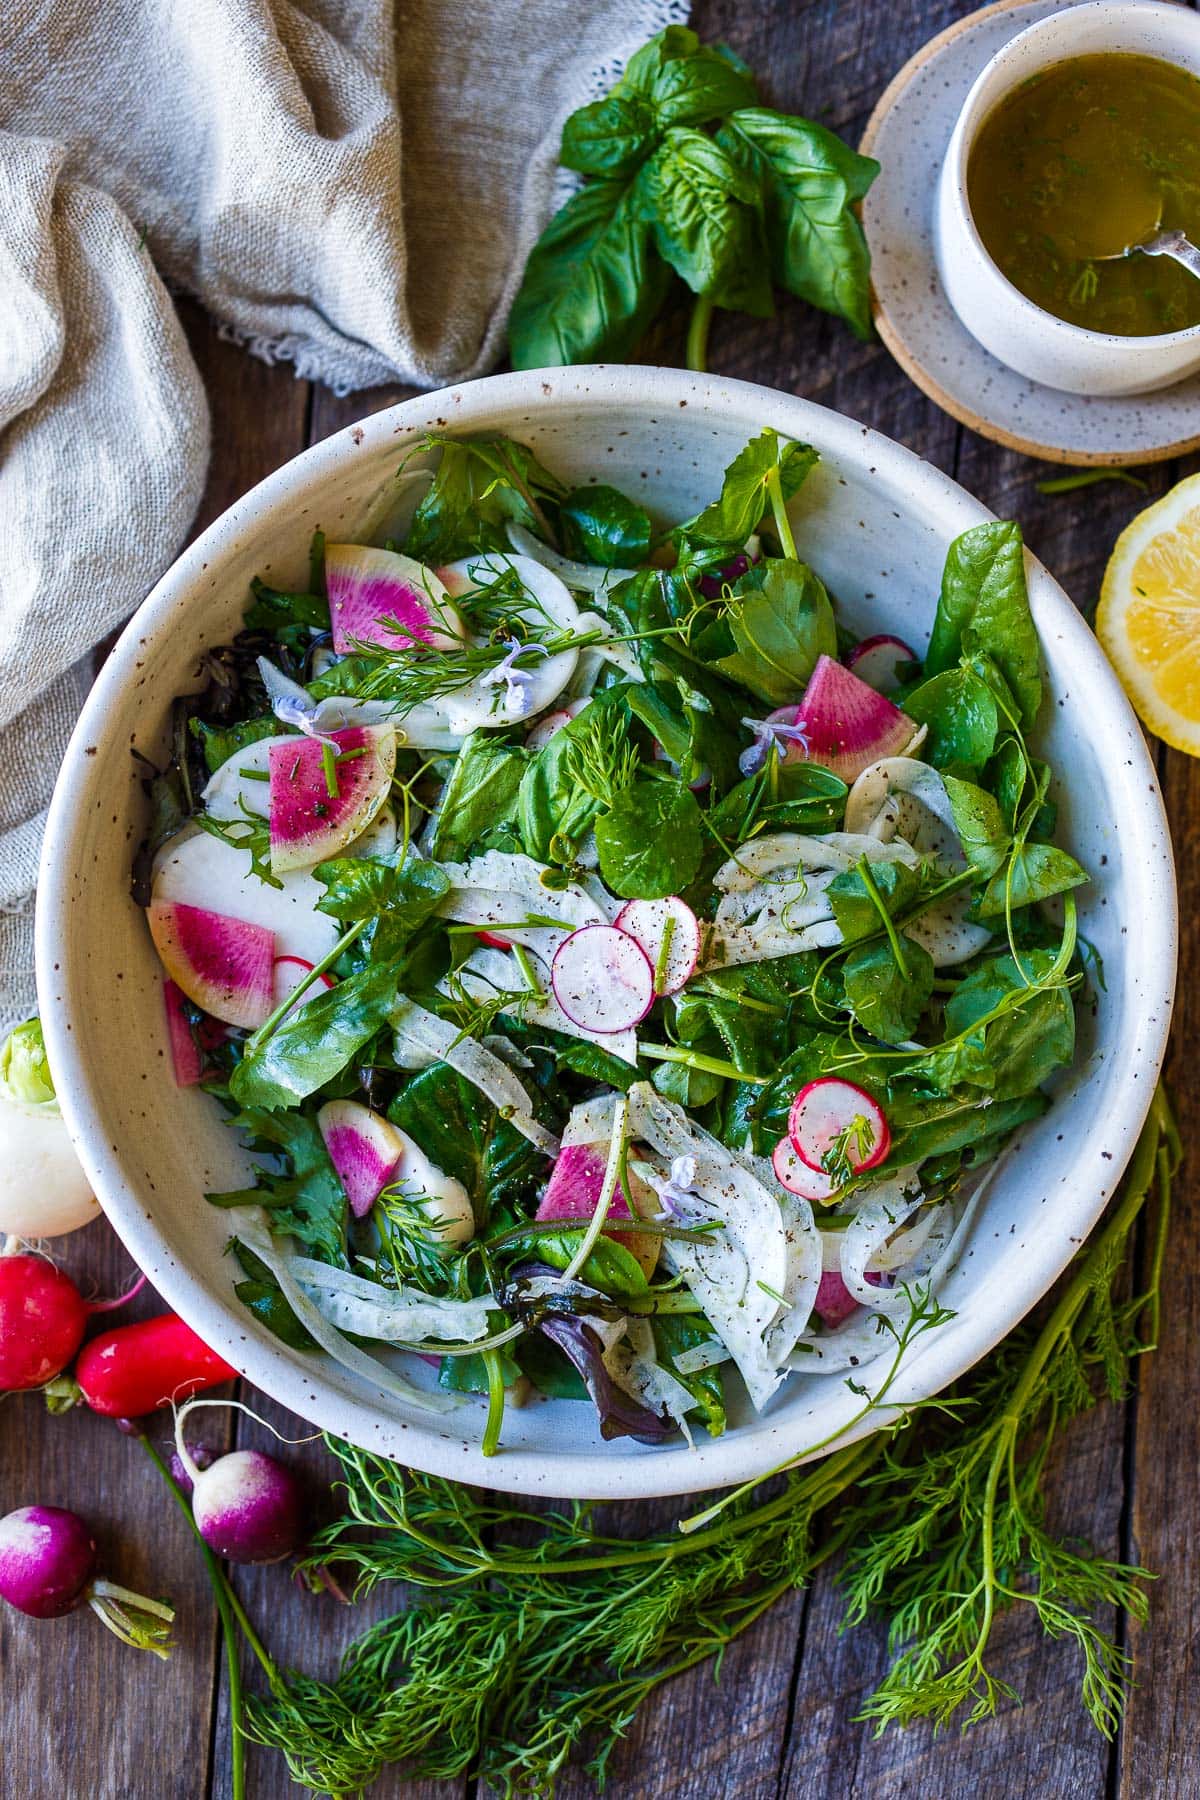 Spring Salad made with spring greens, fresh herbs, shaved fennel, and radishes tossed in a lemon dressing.